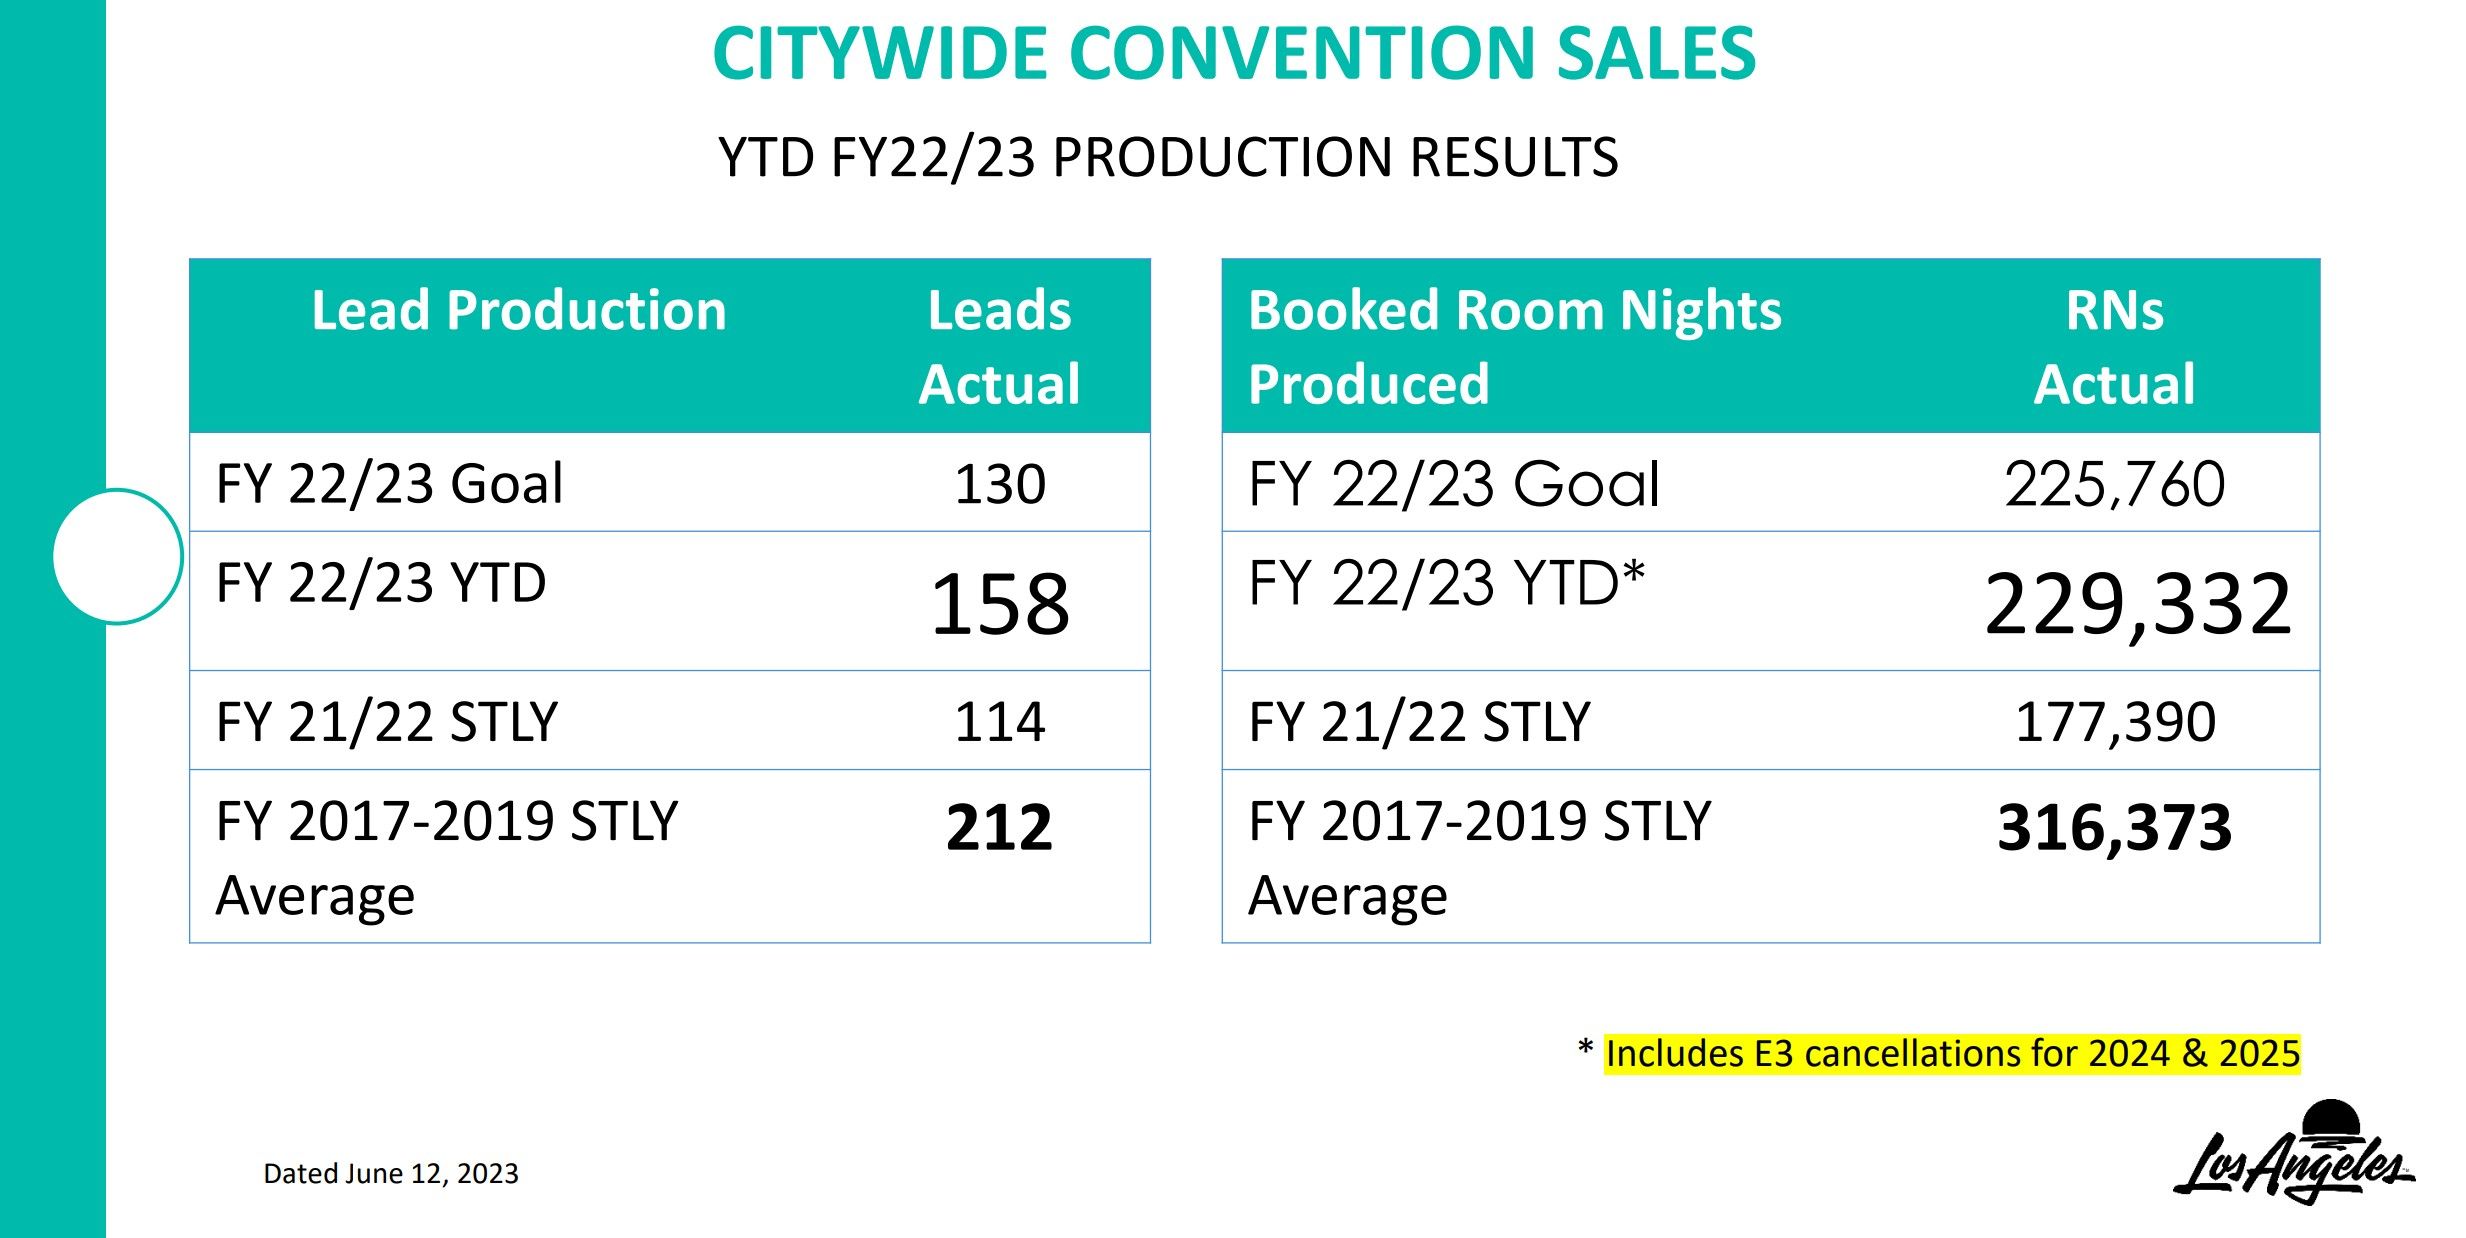 City of LA convention sales results mentioning E3 2024 and 2025 cancellations